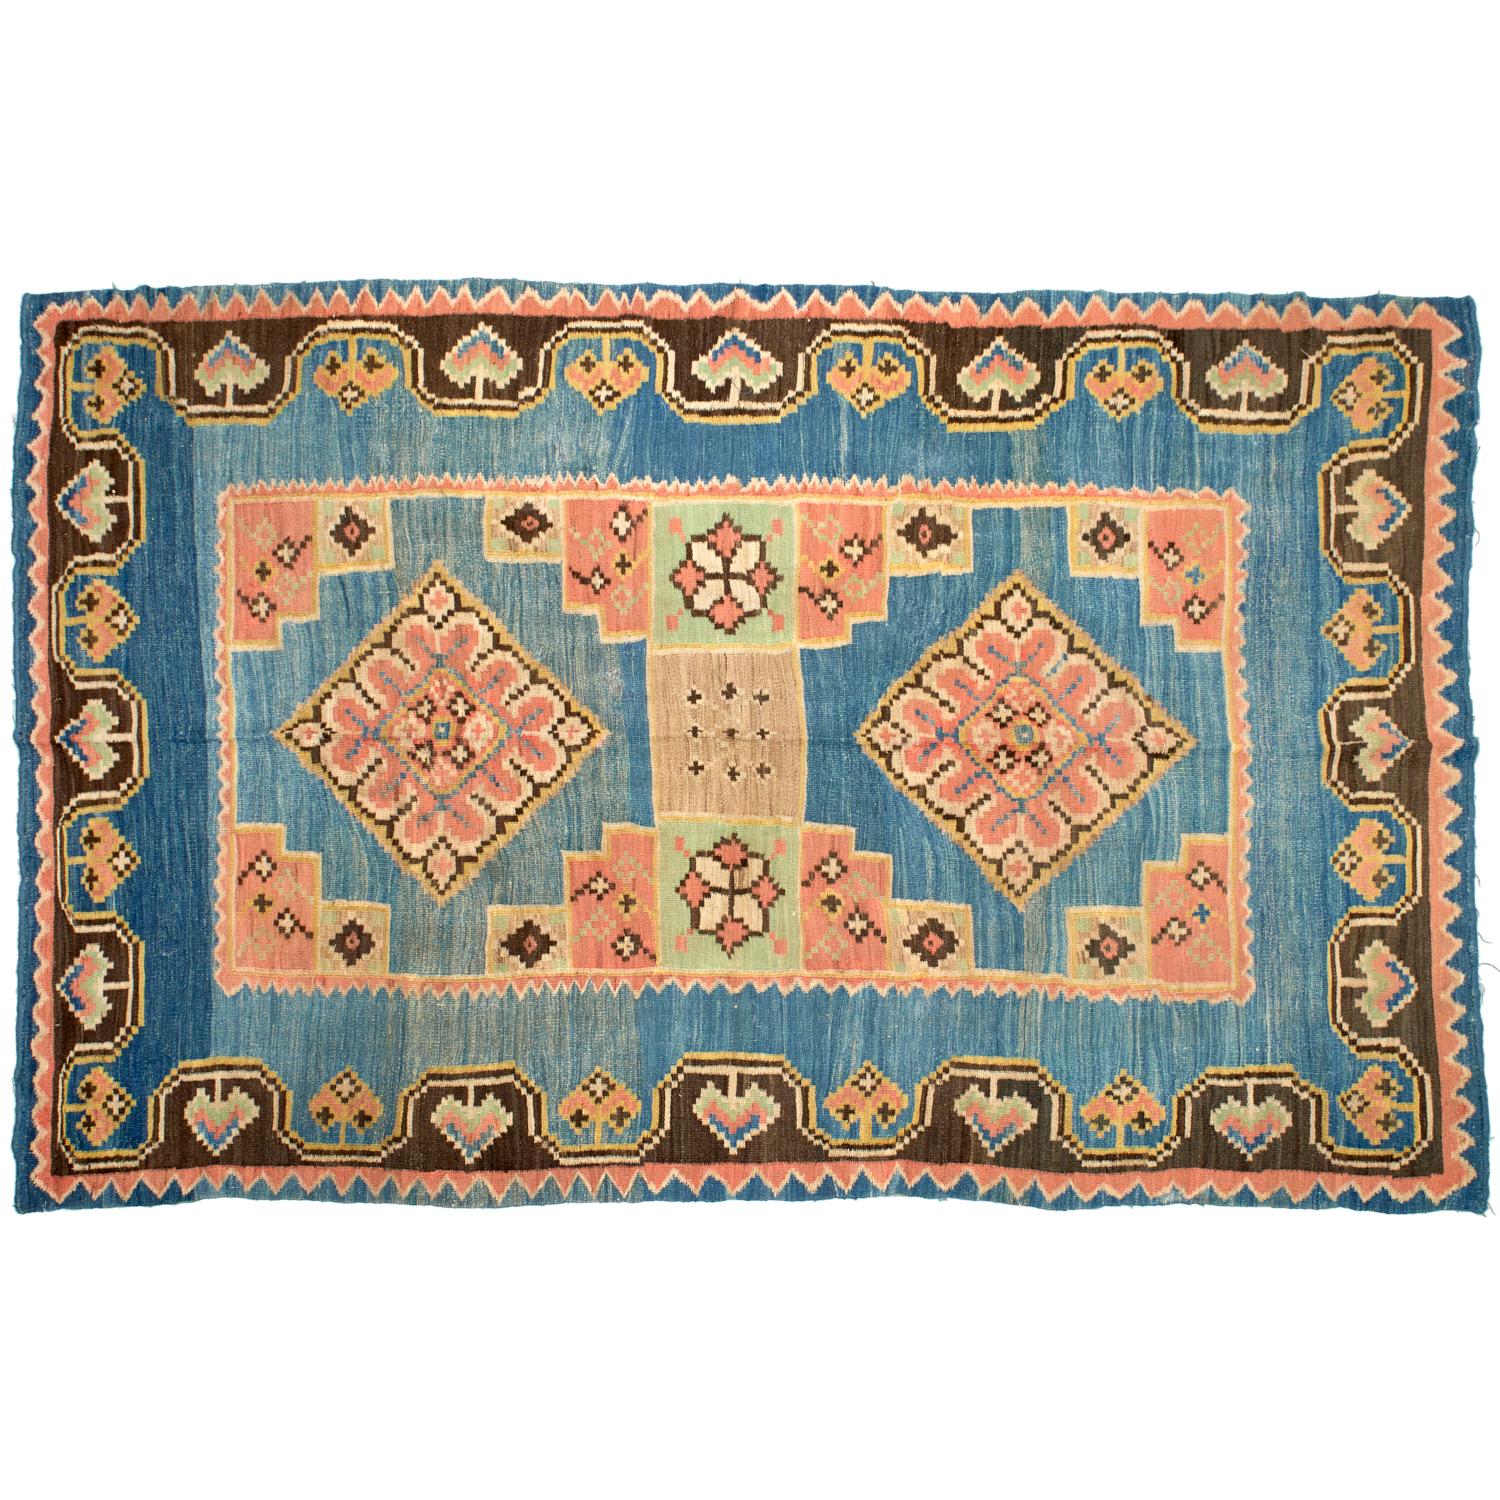 Antique early 20th century Moroccan Kilim rug, with two central diamond medallions, 
made in simple flat-woven or tapestry technique, in which the pattern is produced by horizontal wefts that cover the vertical warps. The ground is a denim blue